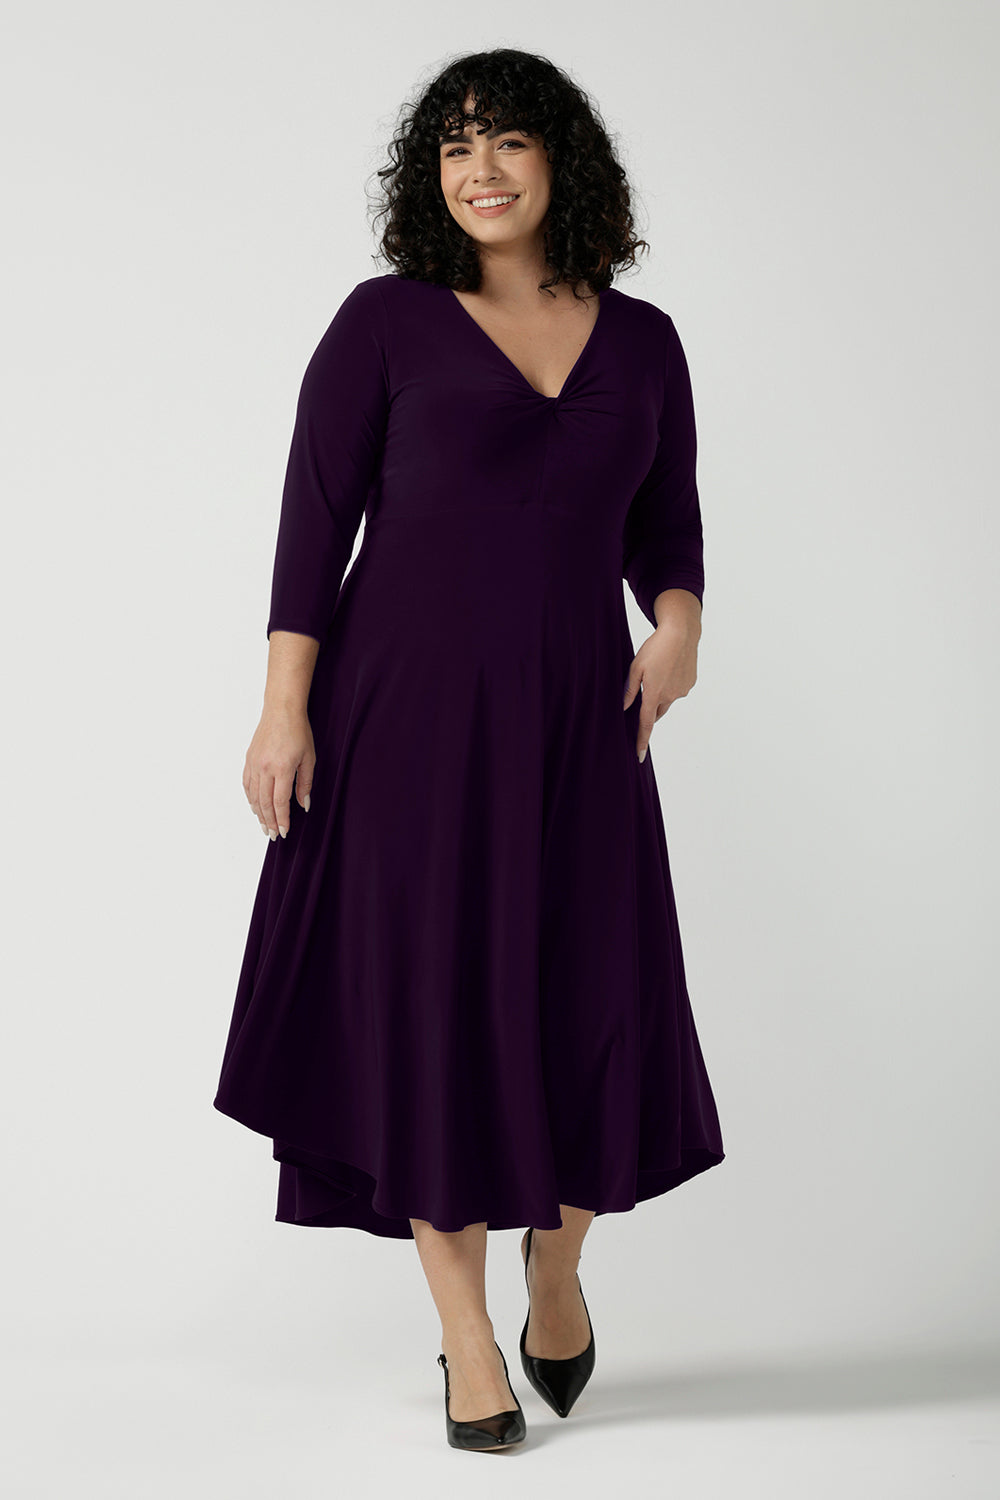 Size 18 Woman wears the Amethyst Kyra dress in jersey. Made in Australia for women. Beautiful twist front neckline with 3/4 sleeve, high-low hem, empire line. Work wear for women and easy care. Great wedding guest outfit, mother of the bride. Made in Australia for women size 8 - 24.